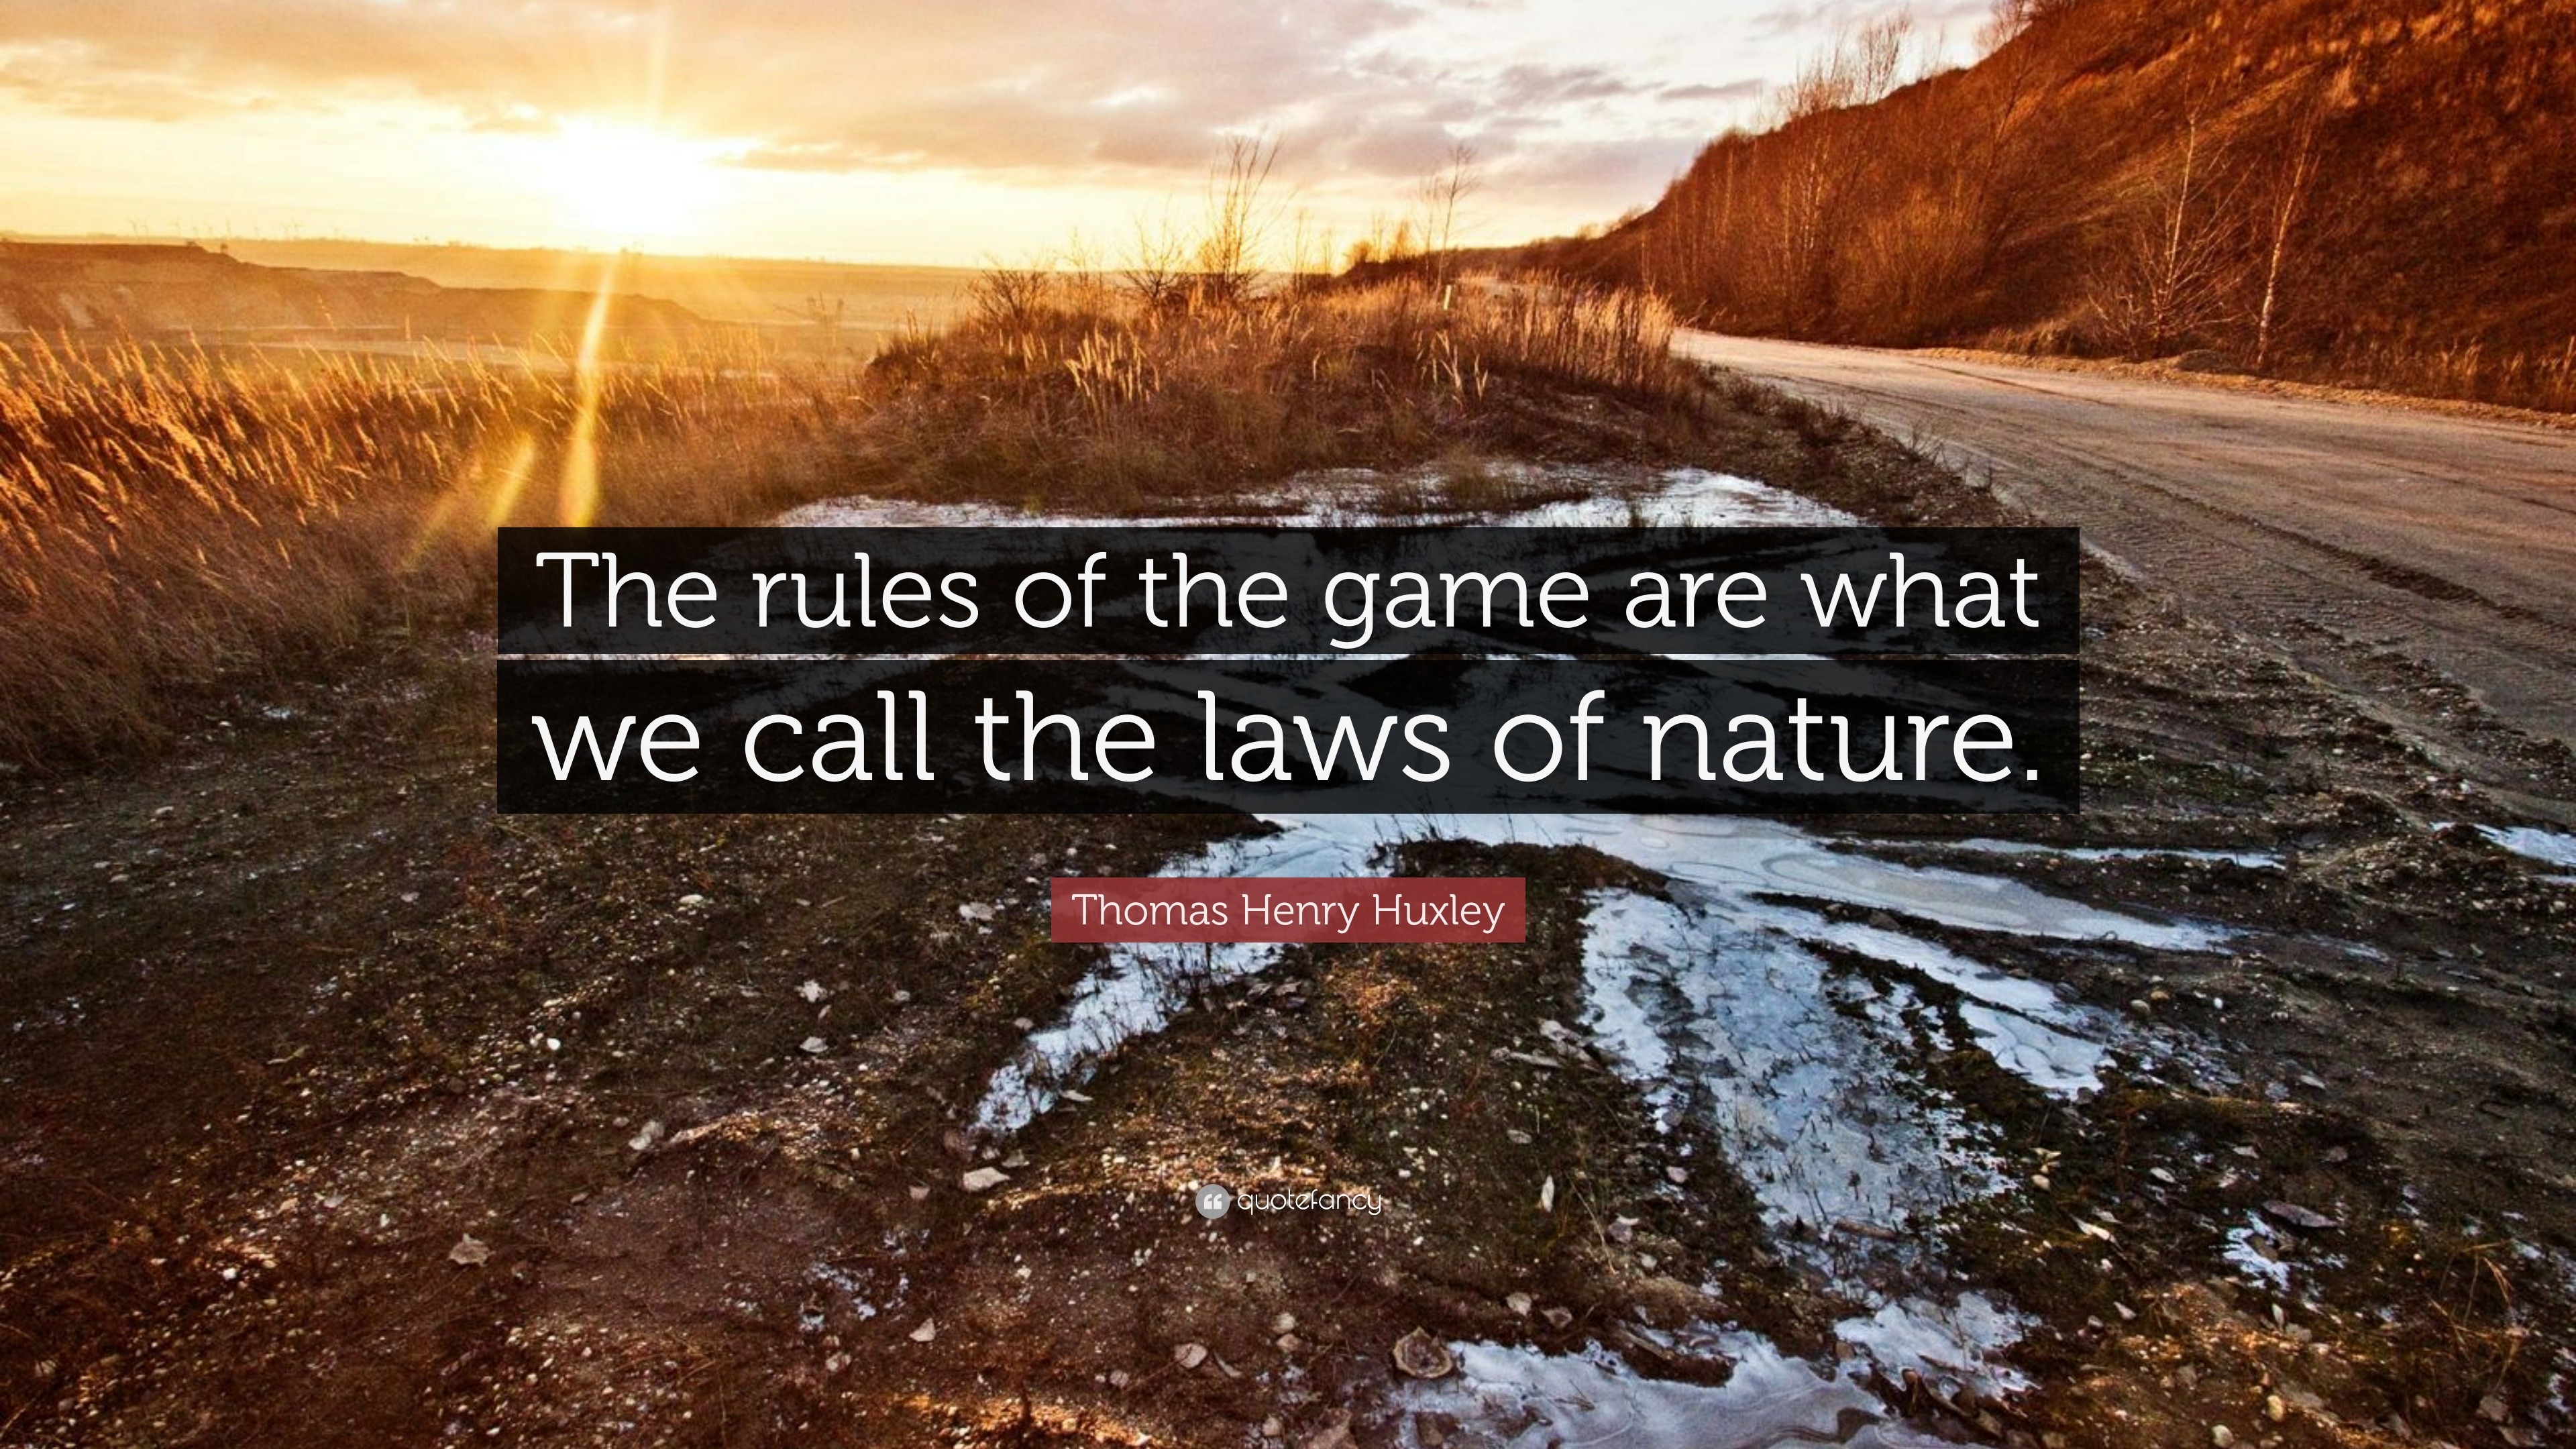 Thomas Henry Huxley rules of the game what we call the laws of